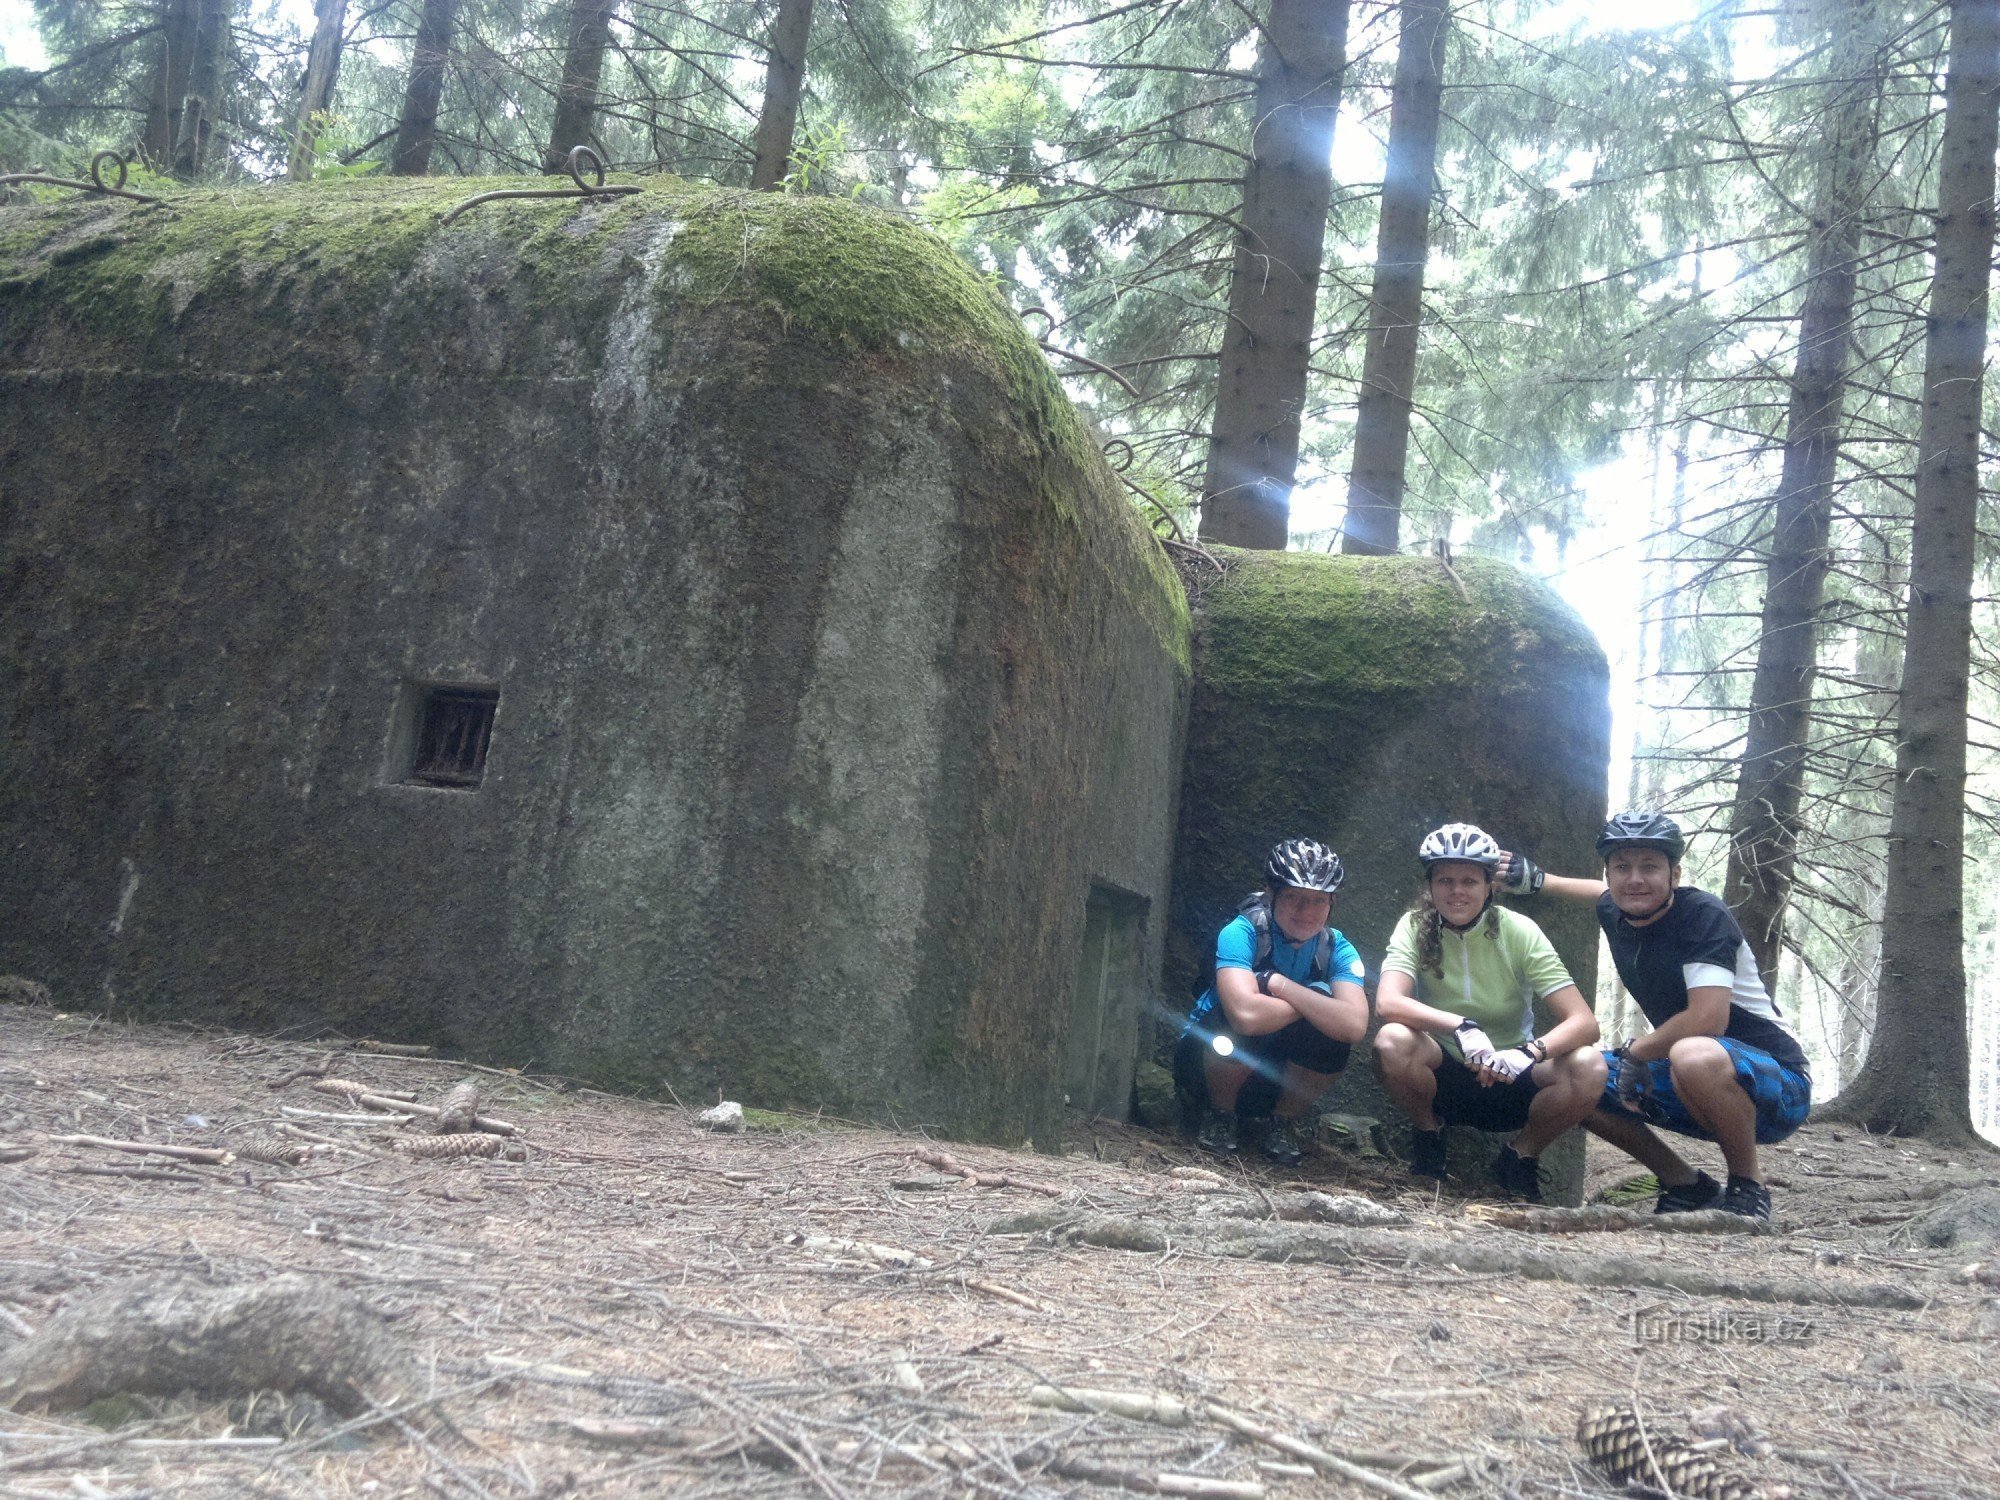 Along the way we encountered other smaller bunkers.